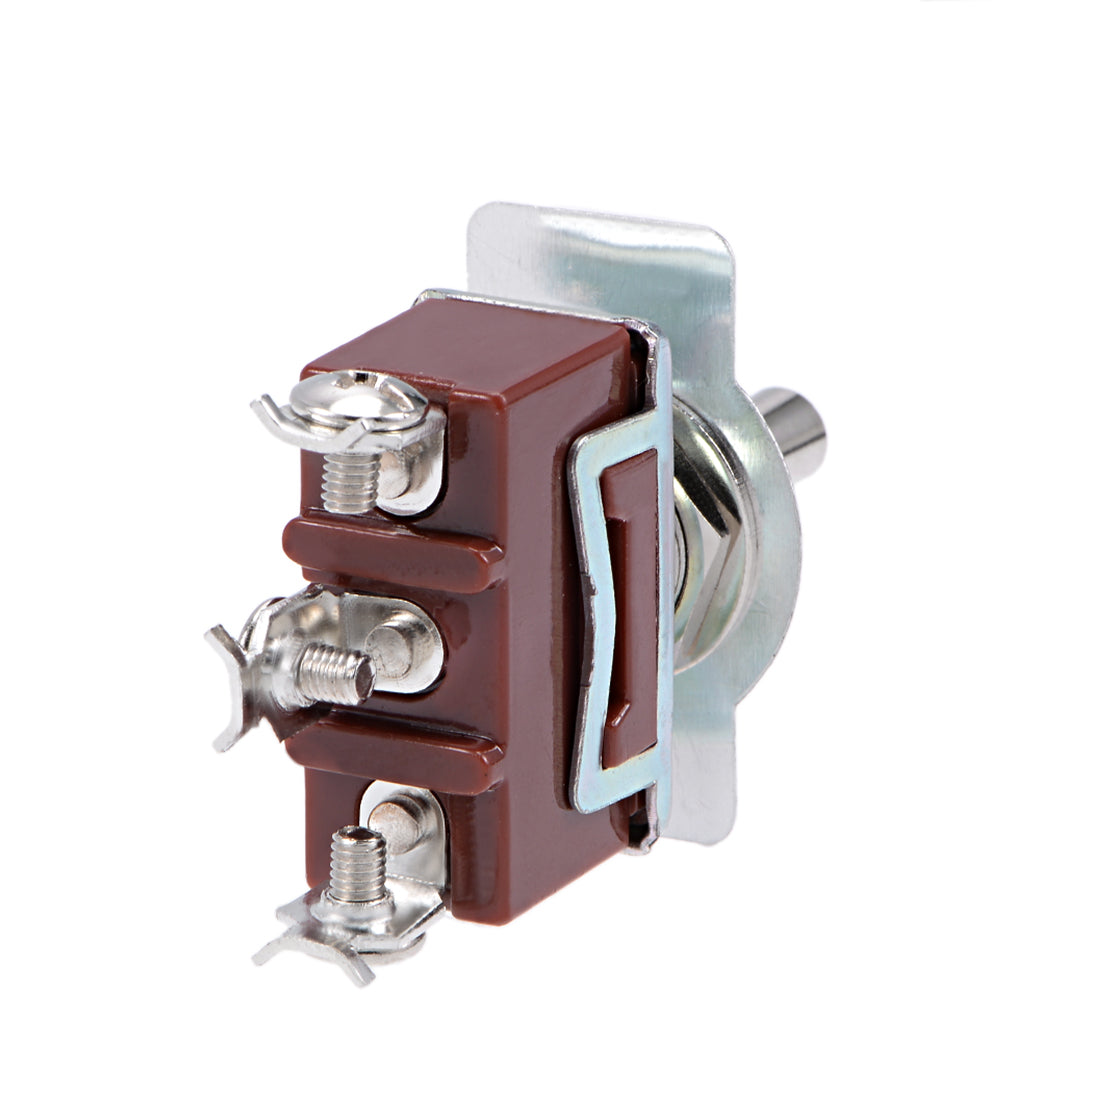 uxcell Uxcell SPDT Momentary Rocker Toggle Switch Heavy-Duty 15A 250V 3P ON/OFF/ON Metal Bat 2pcs